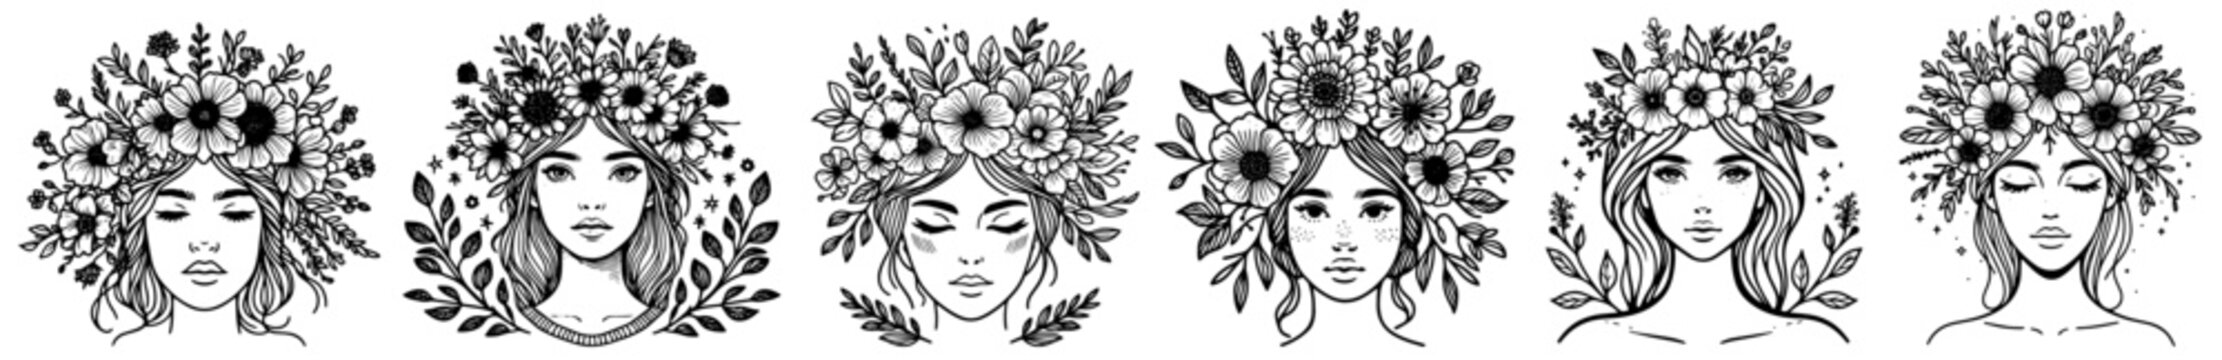 heads of girls in spring style, heads decorated with flower wreaths